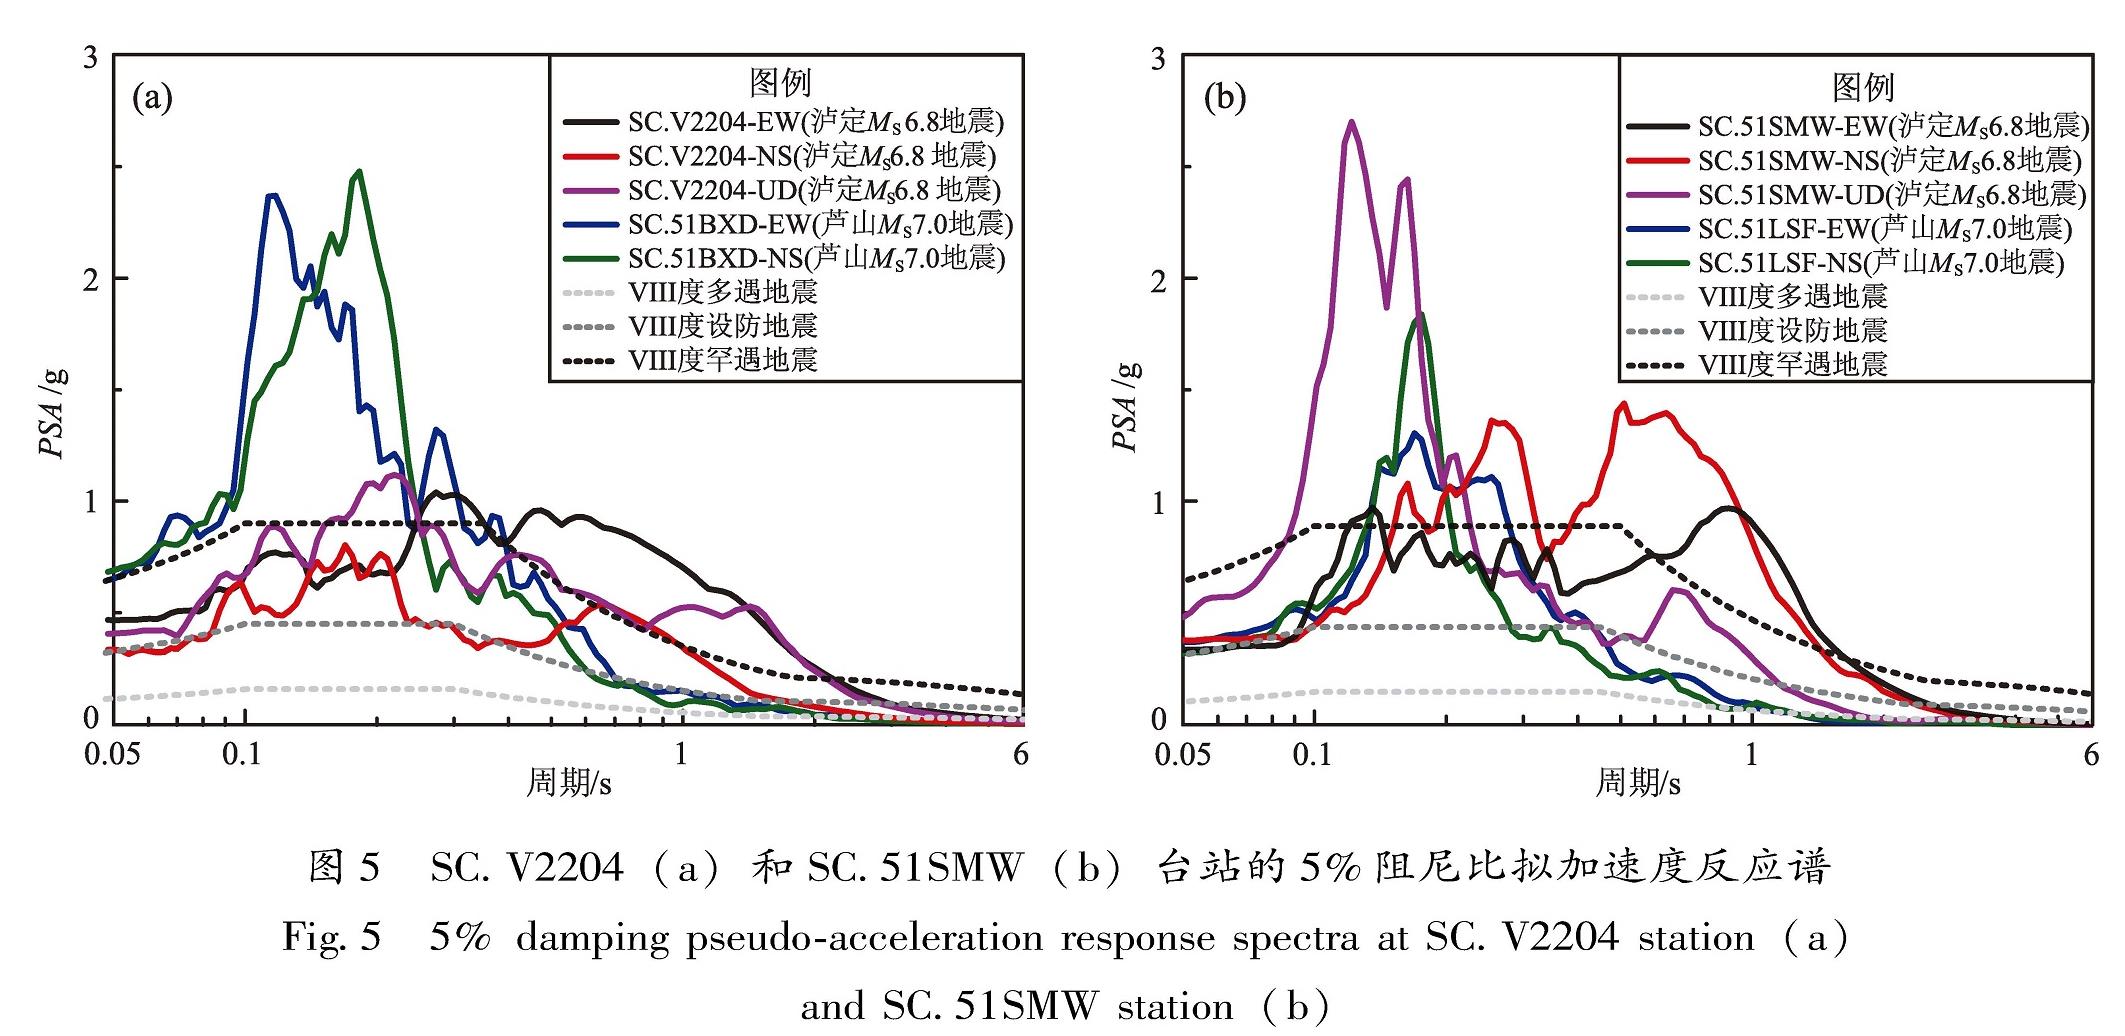 图5 SC.V2204(a)和SC.51SMW(b)台站的5%阻尼比拟加速度反应谱<br/>Fig.5 5% damping pseudo-acceleration response spectra at SC.V2204 station(a) and SC.51SMW station(b)